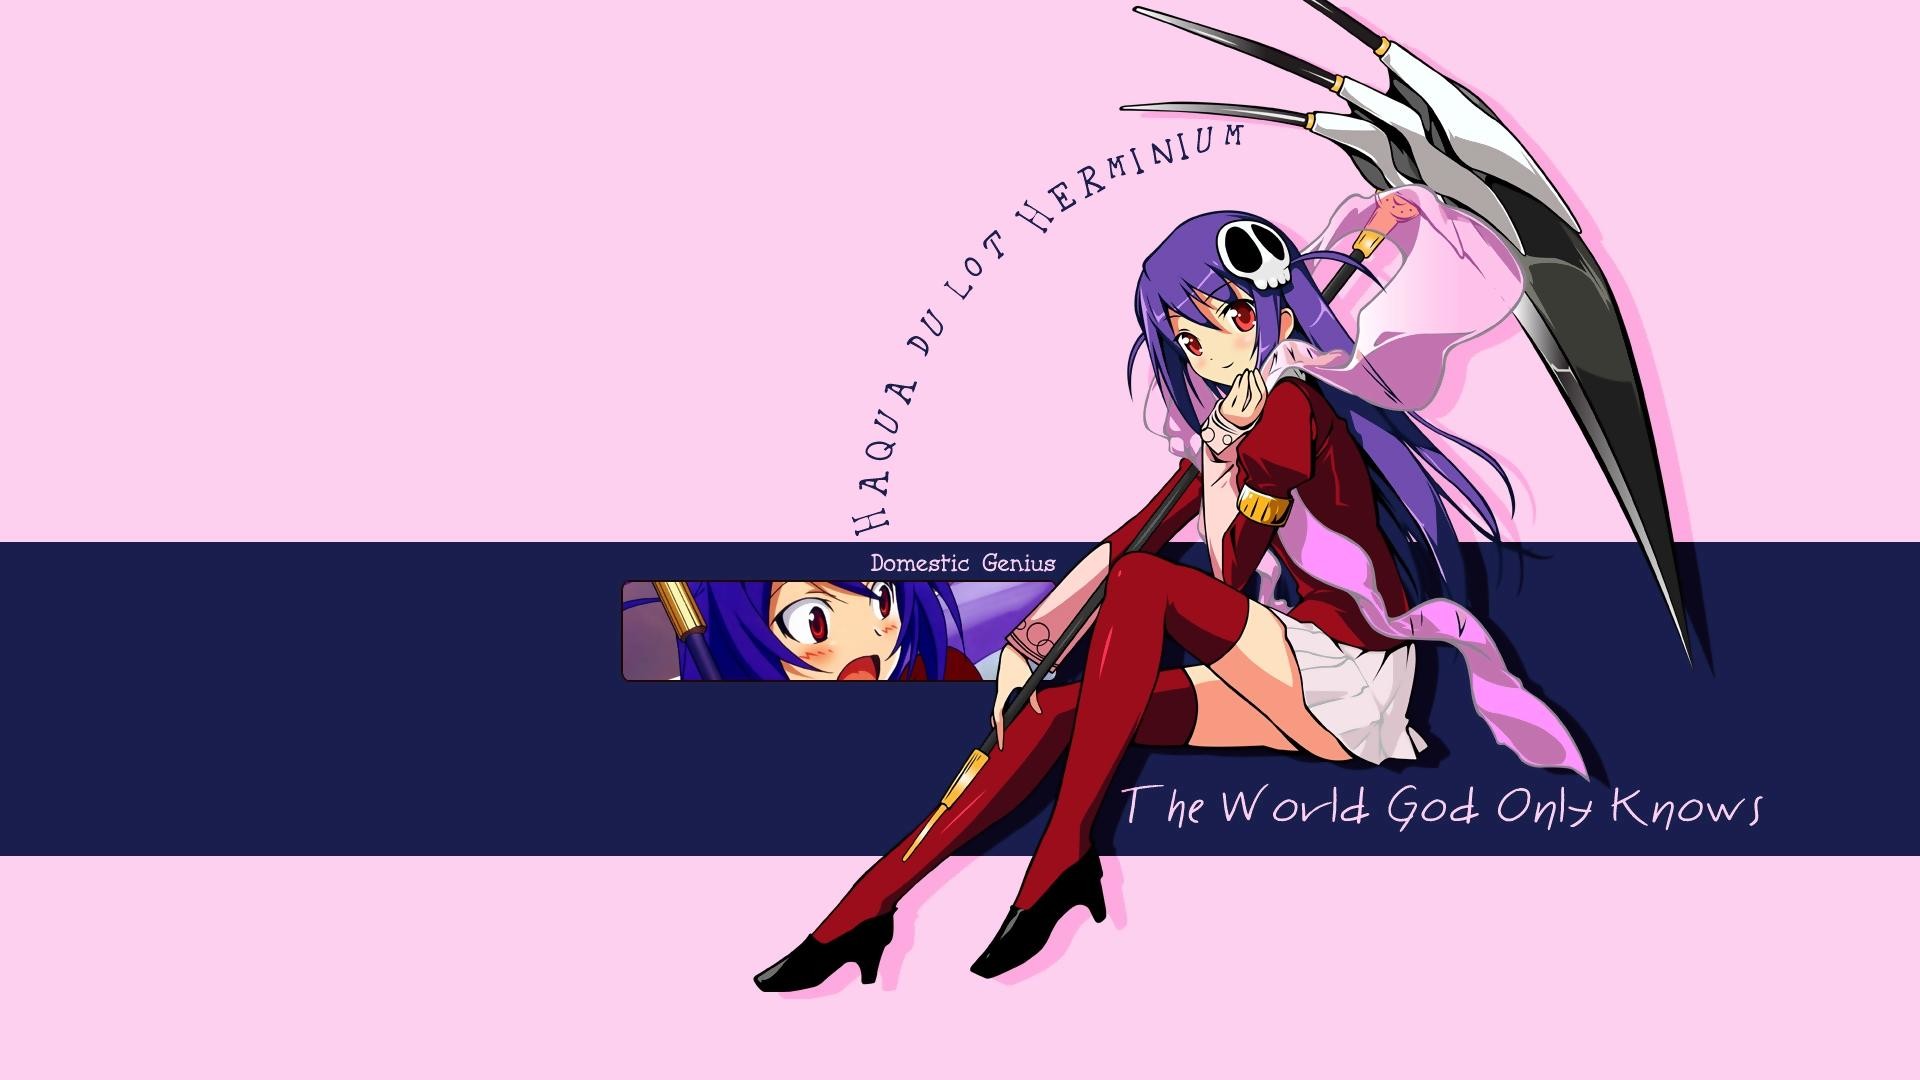 1920x1080 Anime - The World God Only Knows Wallpaper